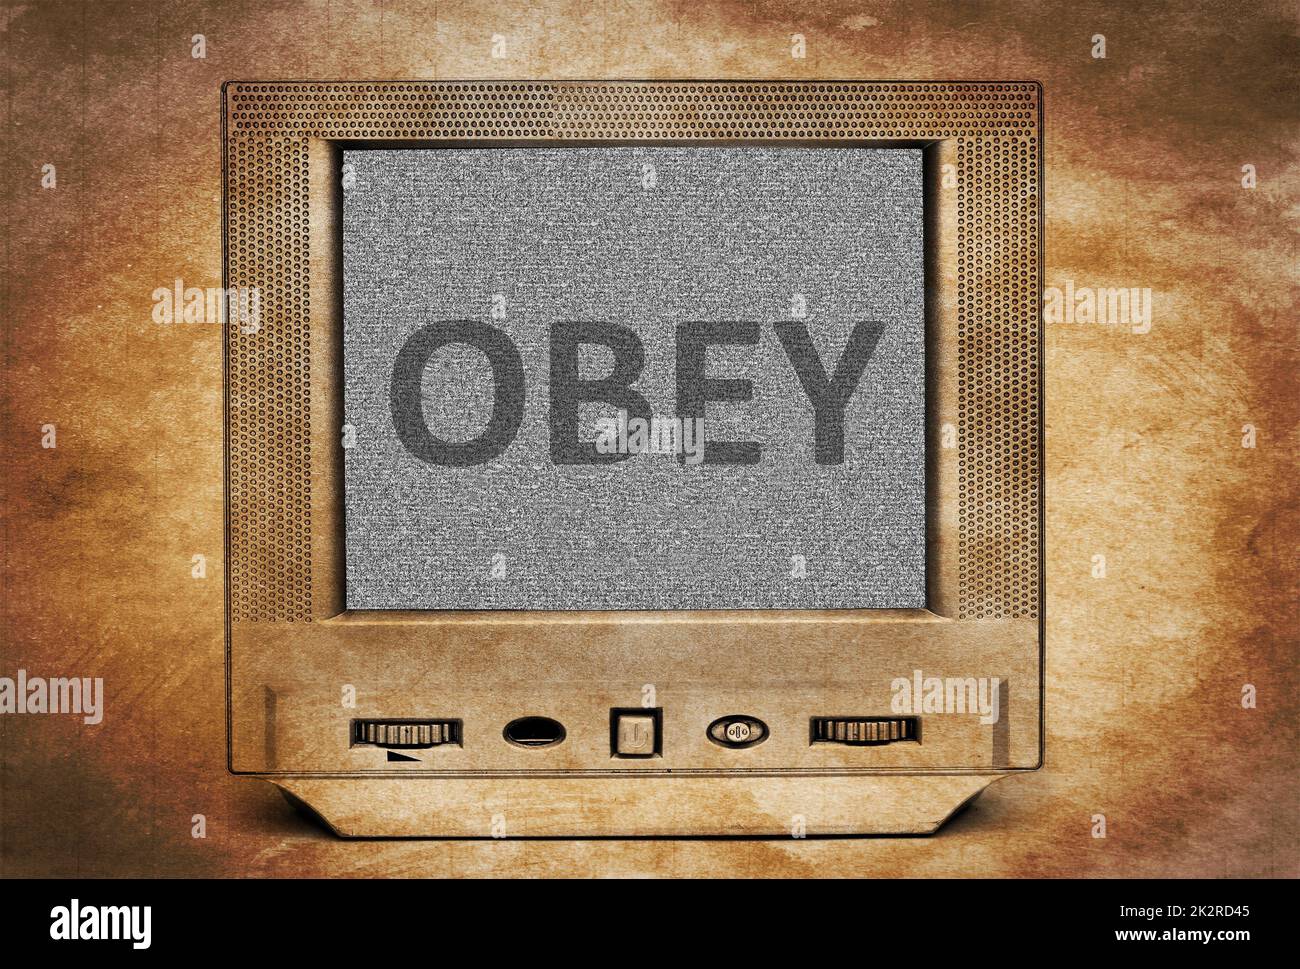 Obey sign on vintage TV Stock Photo